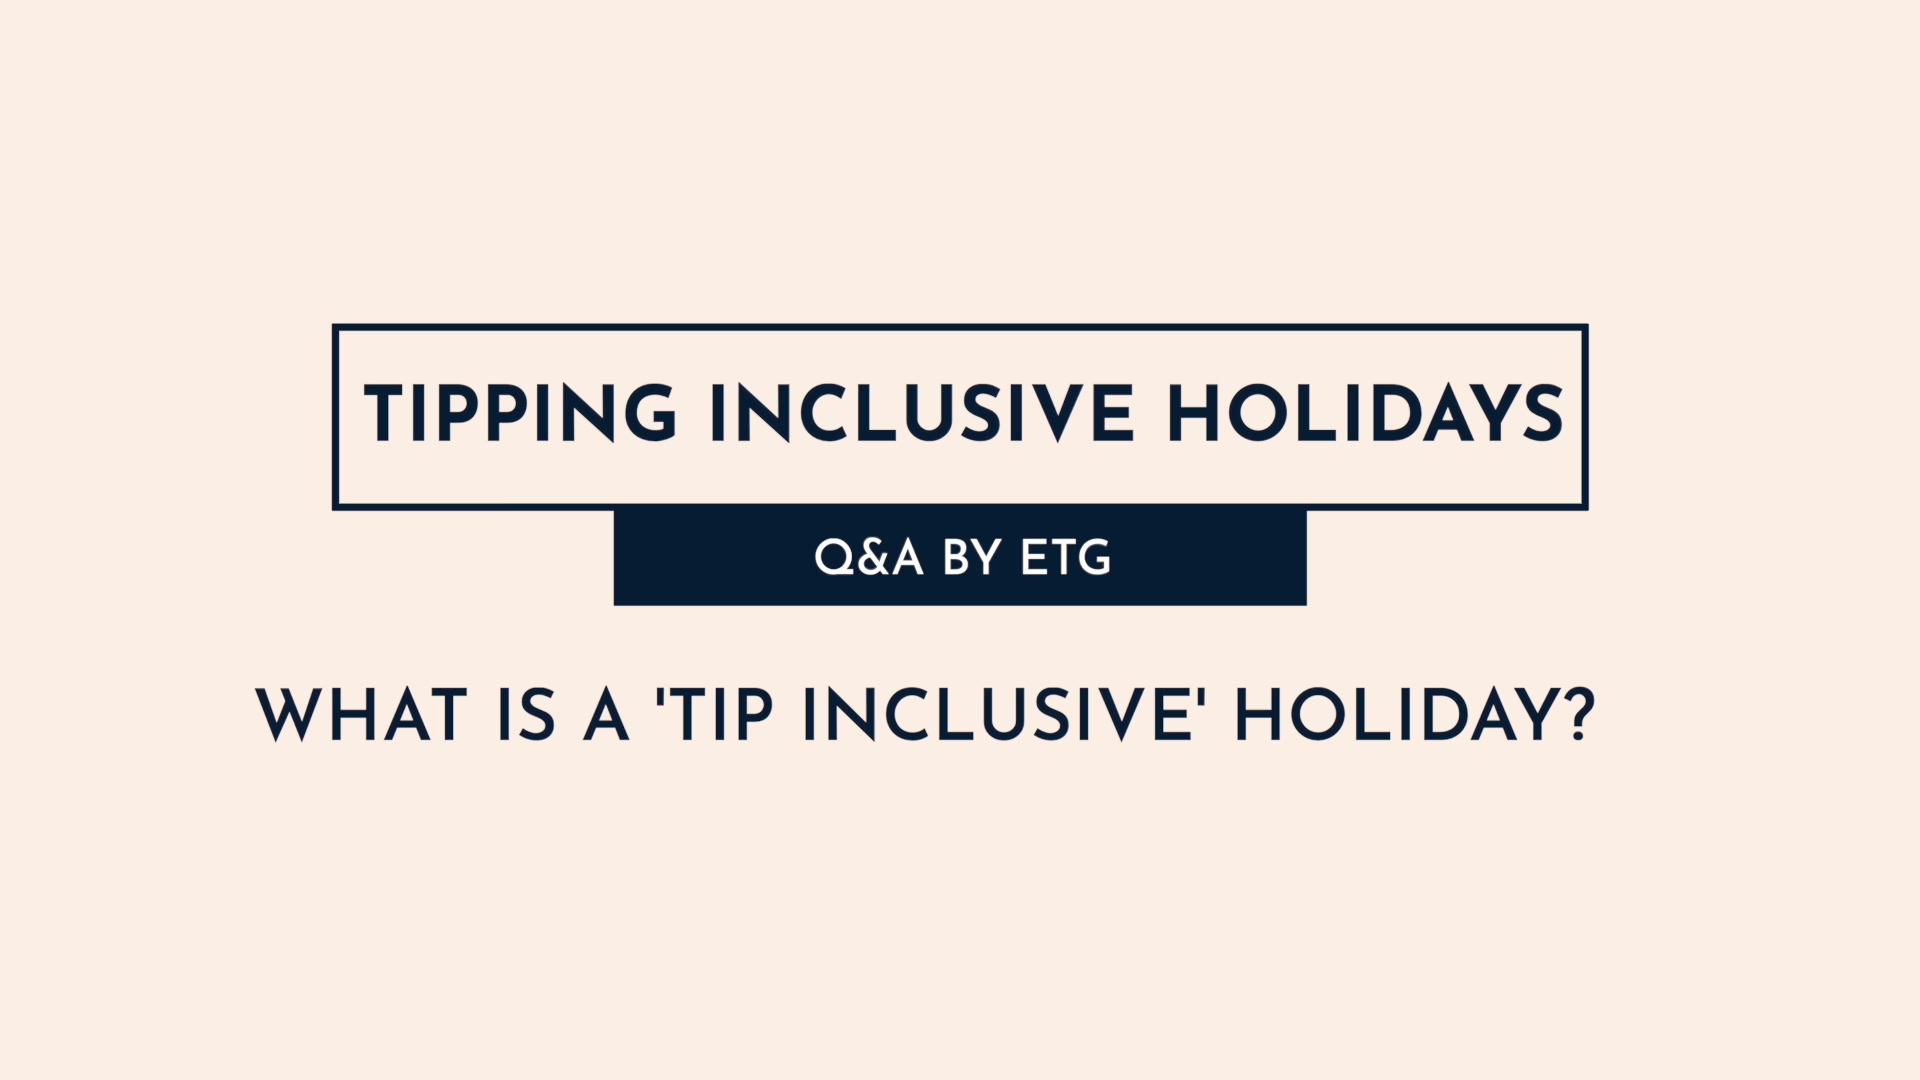 1 - What is a tip inclusive holiday